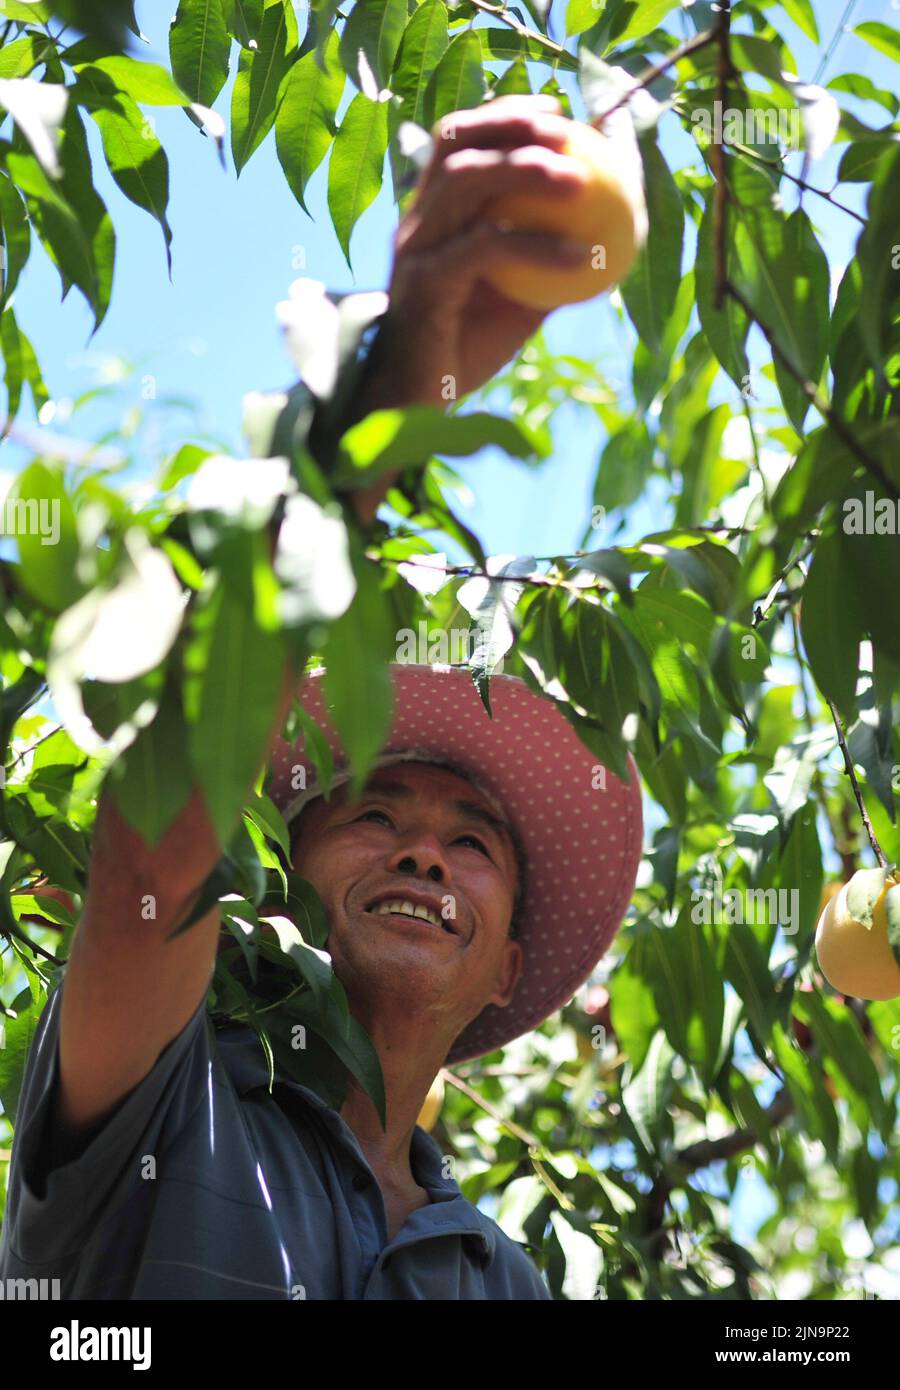 Qiandongnan, China's Guizhou Province. 10th Aug, 2022. A villager harvests peaches in Banxi Village of Tonglin Town in Qiandongnan Miao and Dong Autonomous Prefecture, southwest China's Guizhou Province, Aug. 10, 2022. Villagers in Banxi Village are busying harvesting fruits such as peaches, pears and plums amid the harvest season. Credit: Jiang Hongqi/Xinhua/Alamy Live News Stock Photo